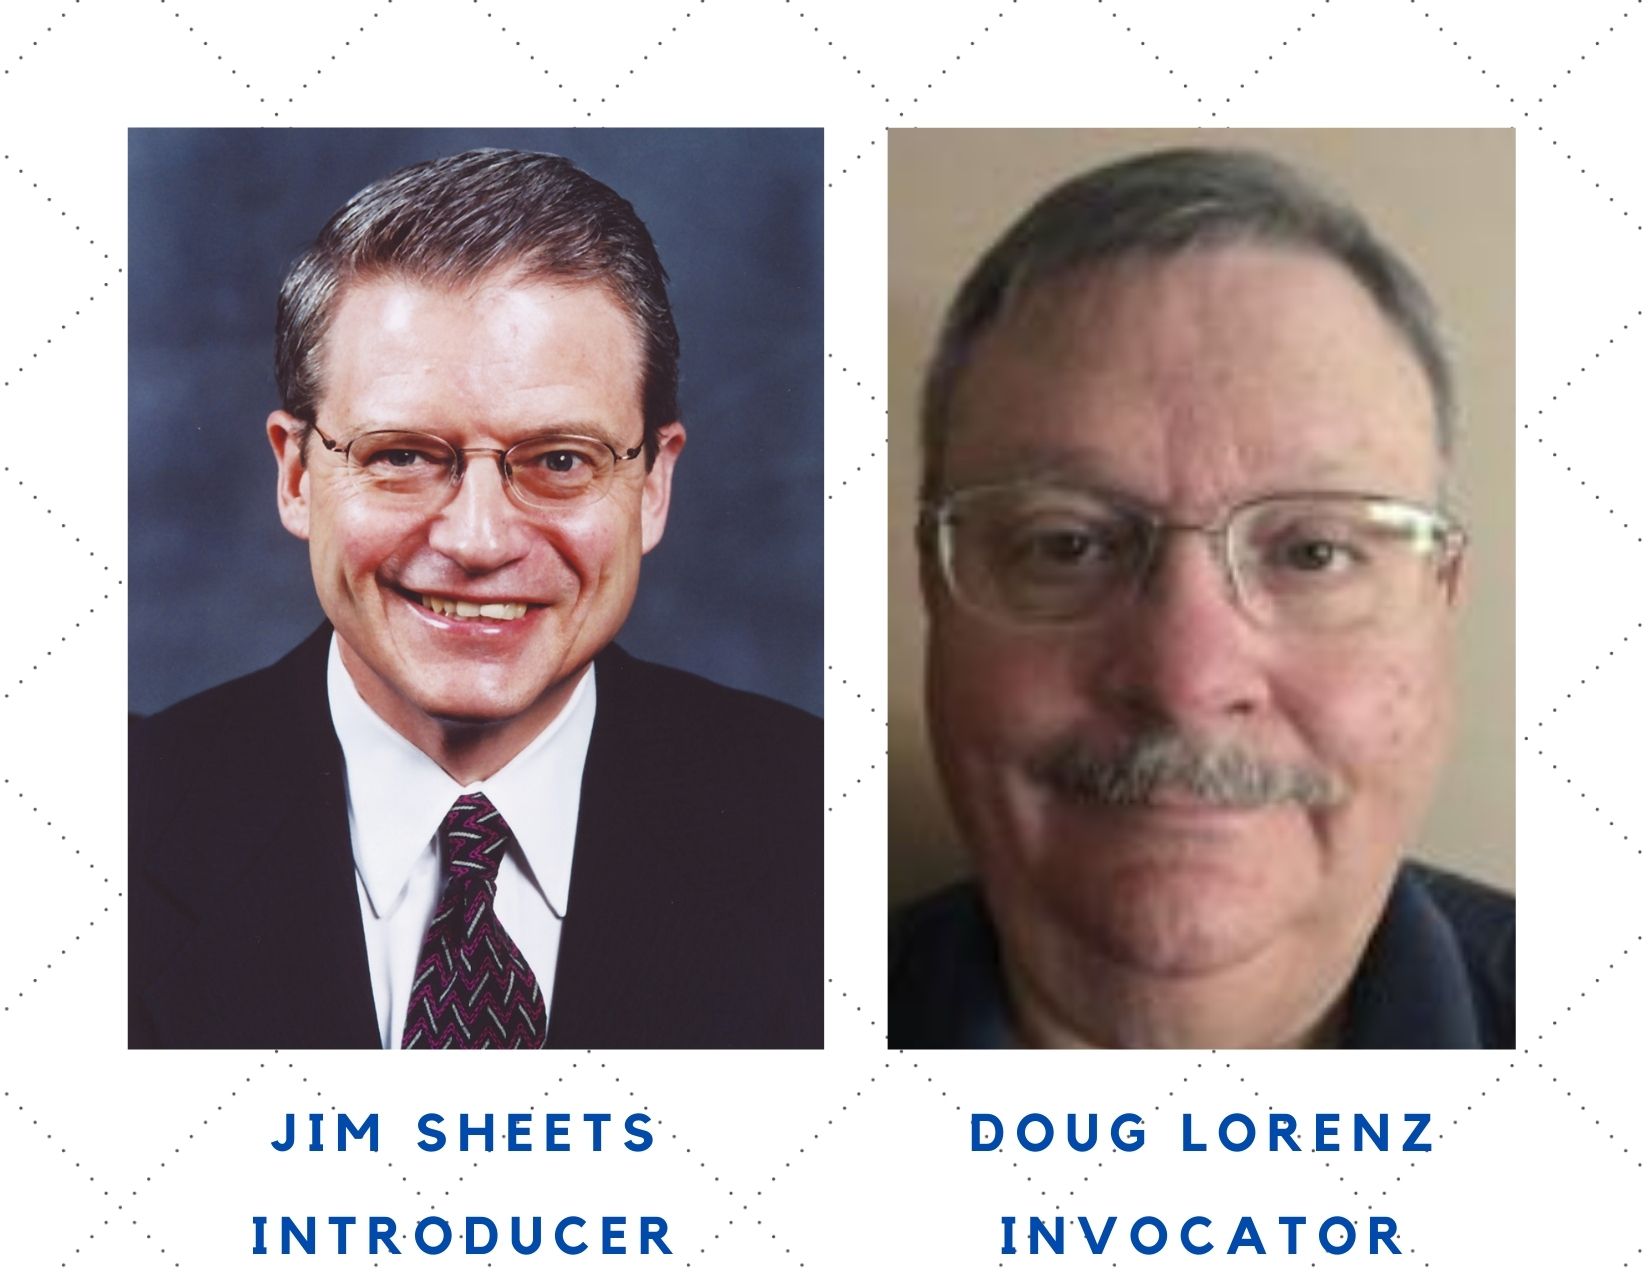 Jim Sheets, Introducer & Doug Lorenz, Invocator for St. Louis Rotary lunch on 8-12-21